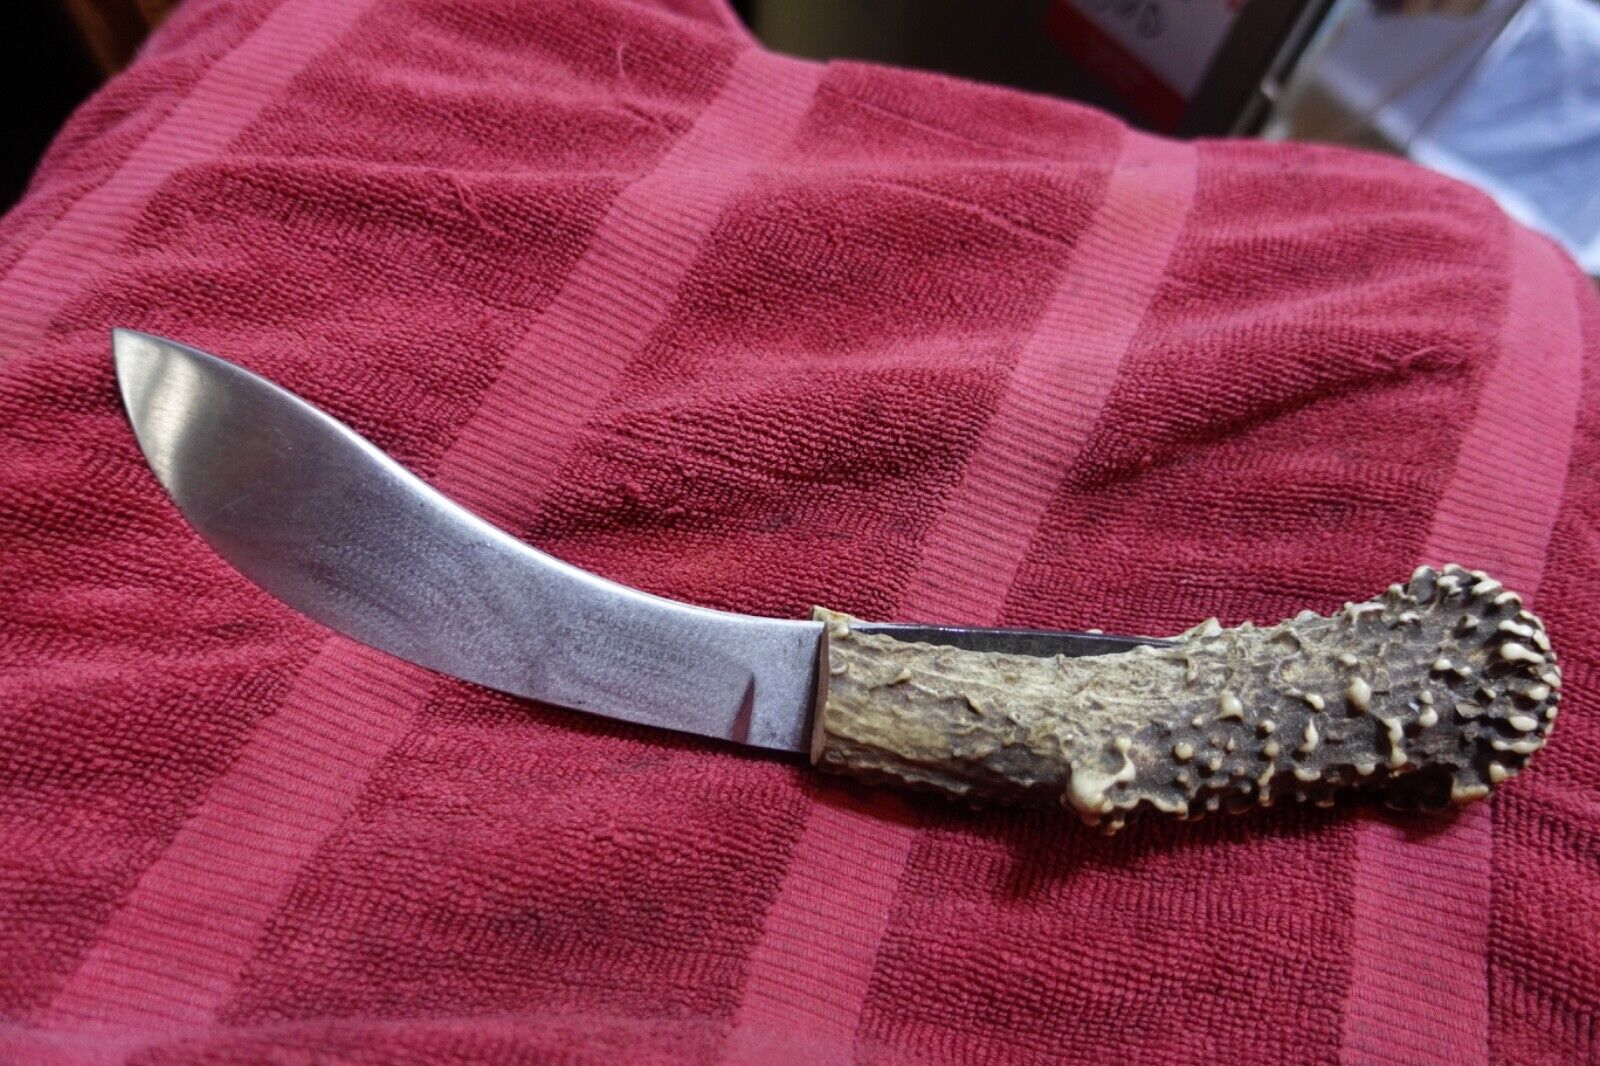 Russell Green River Works Skinner knife. USA Knife Makers Project